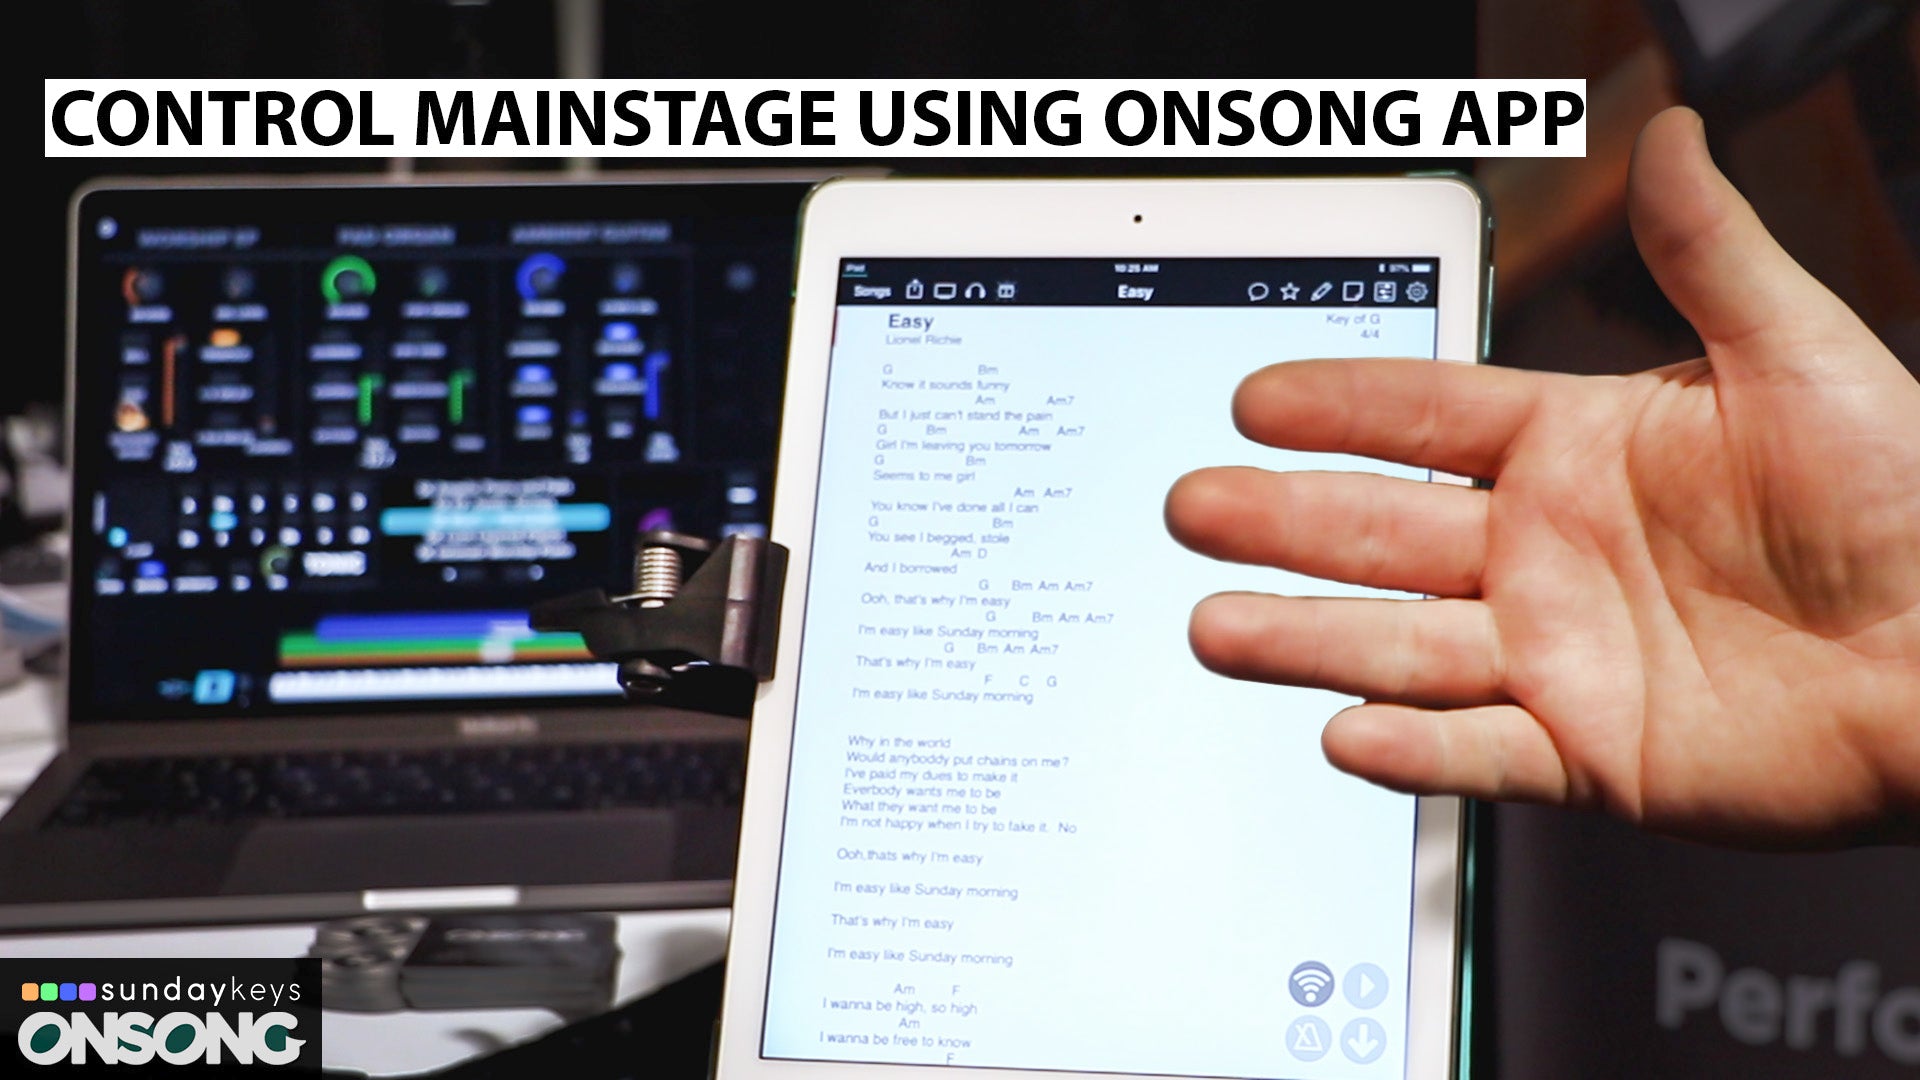 Use OnSong to Change Patches in Sunday Keys - NAMM 2019 MIDI Booth